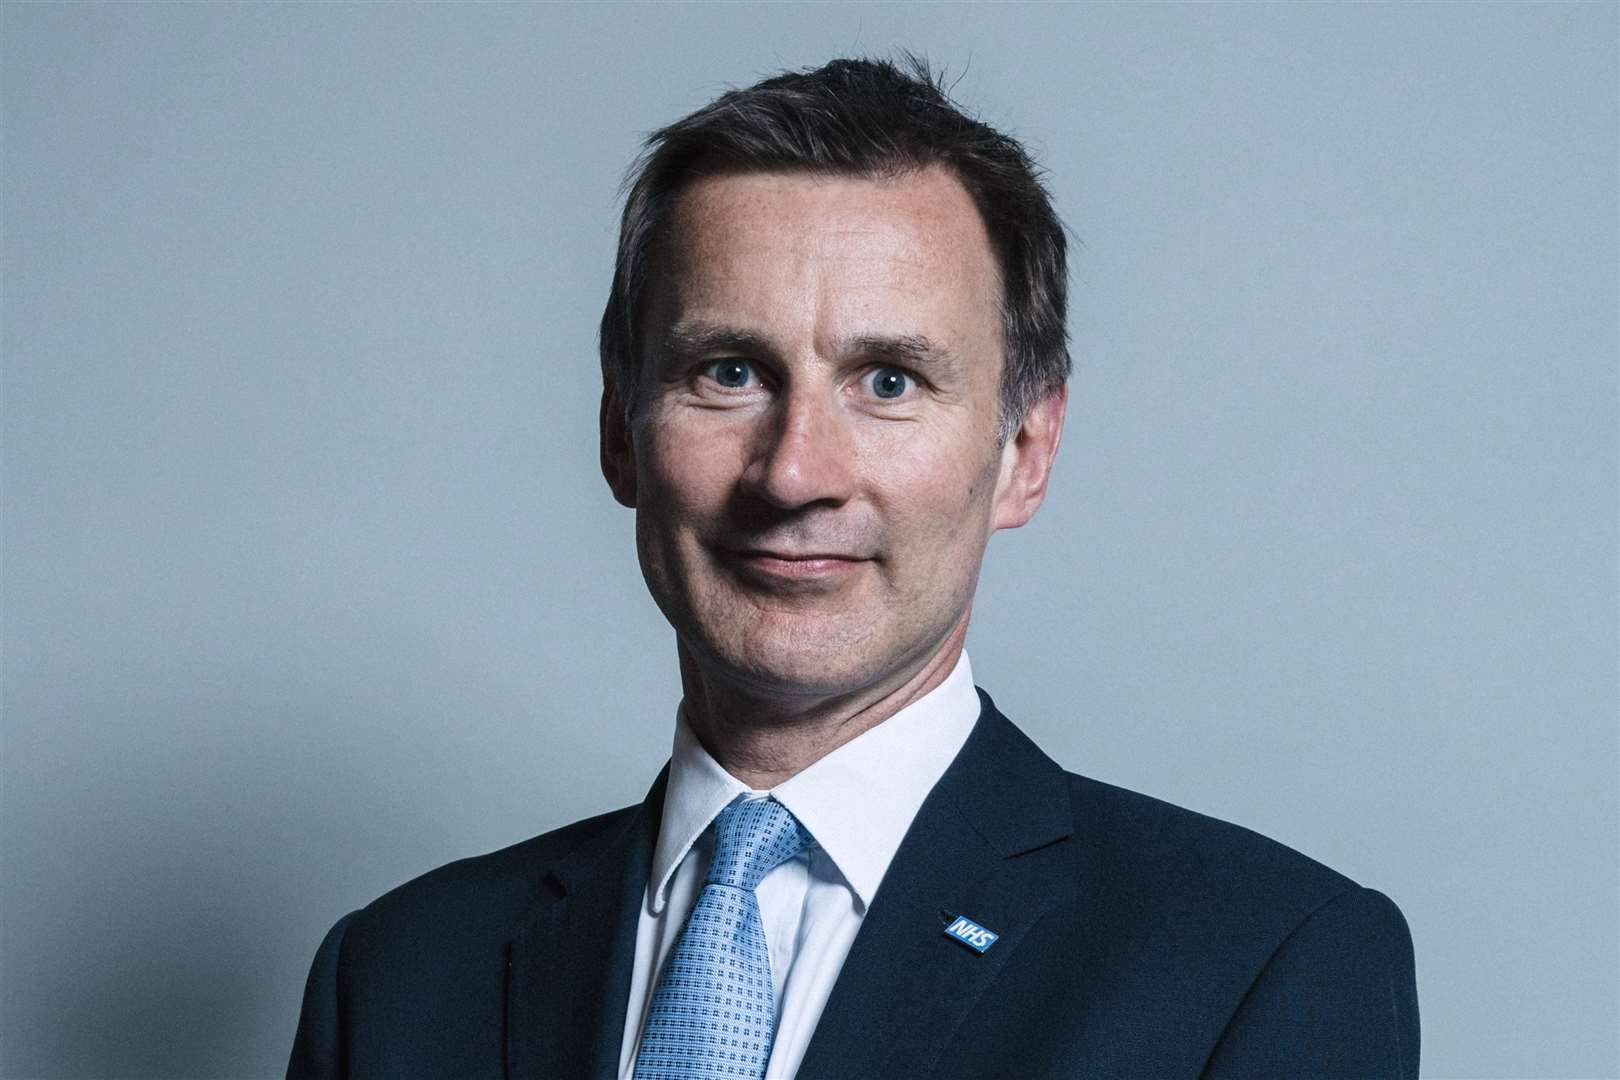 Jeremy Hunt, the new Chancellor has scaled back the government's offer of help